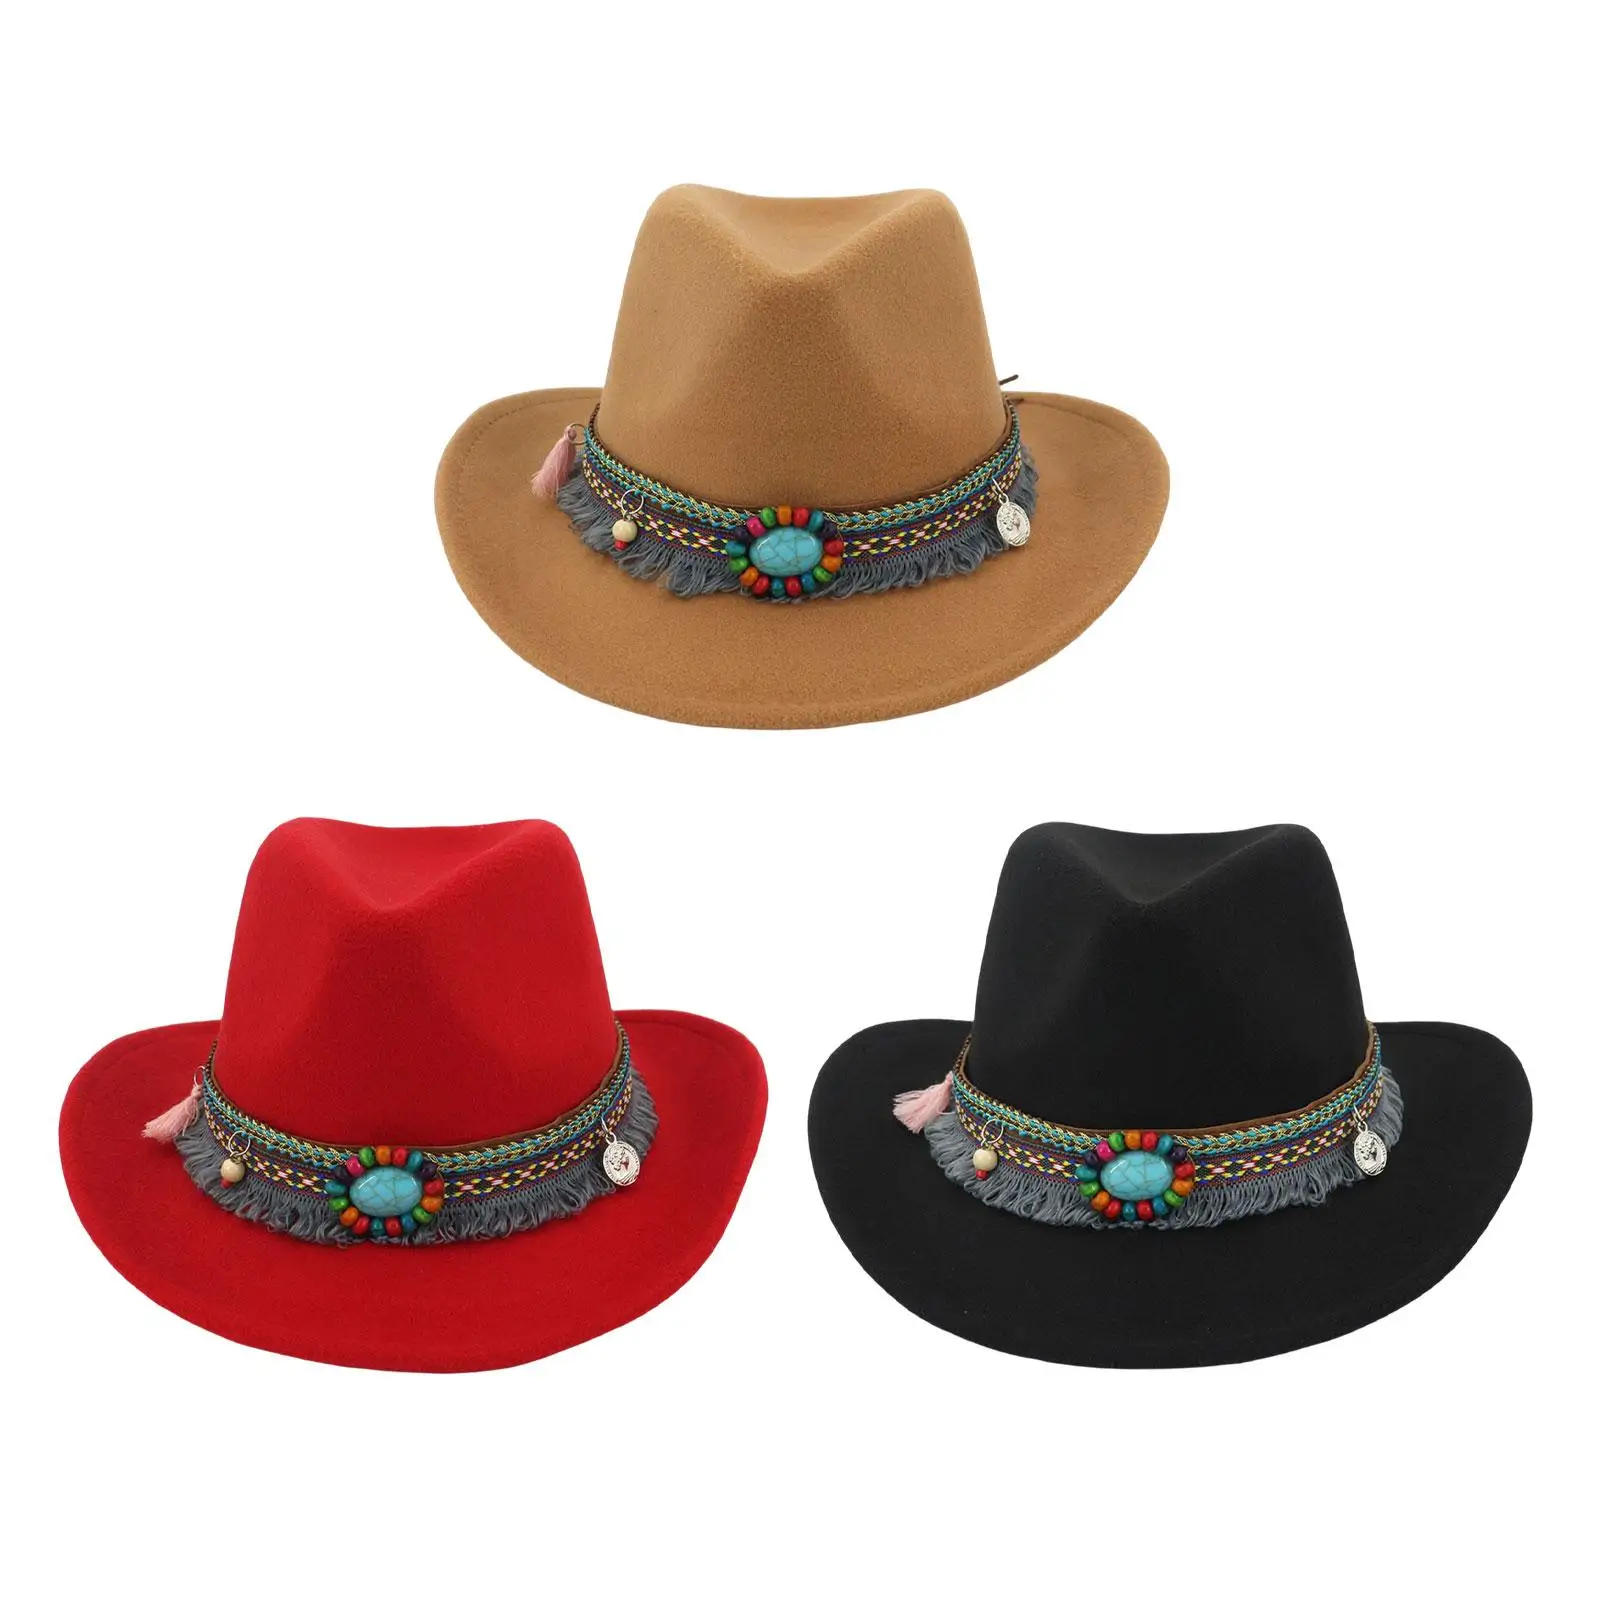 Fashion Women Men Cowboy Hat Fedoras Caps Accessories Panama Hat Cowgirl Hat Jazz Top Hat Costumes Sun Hat for Festival Holiday